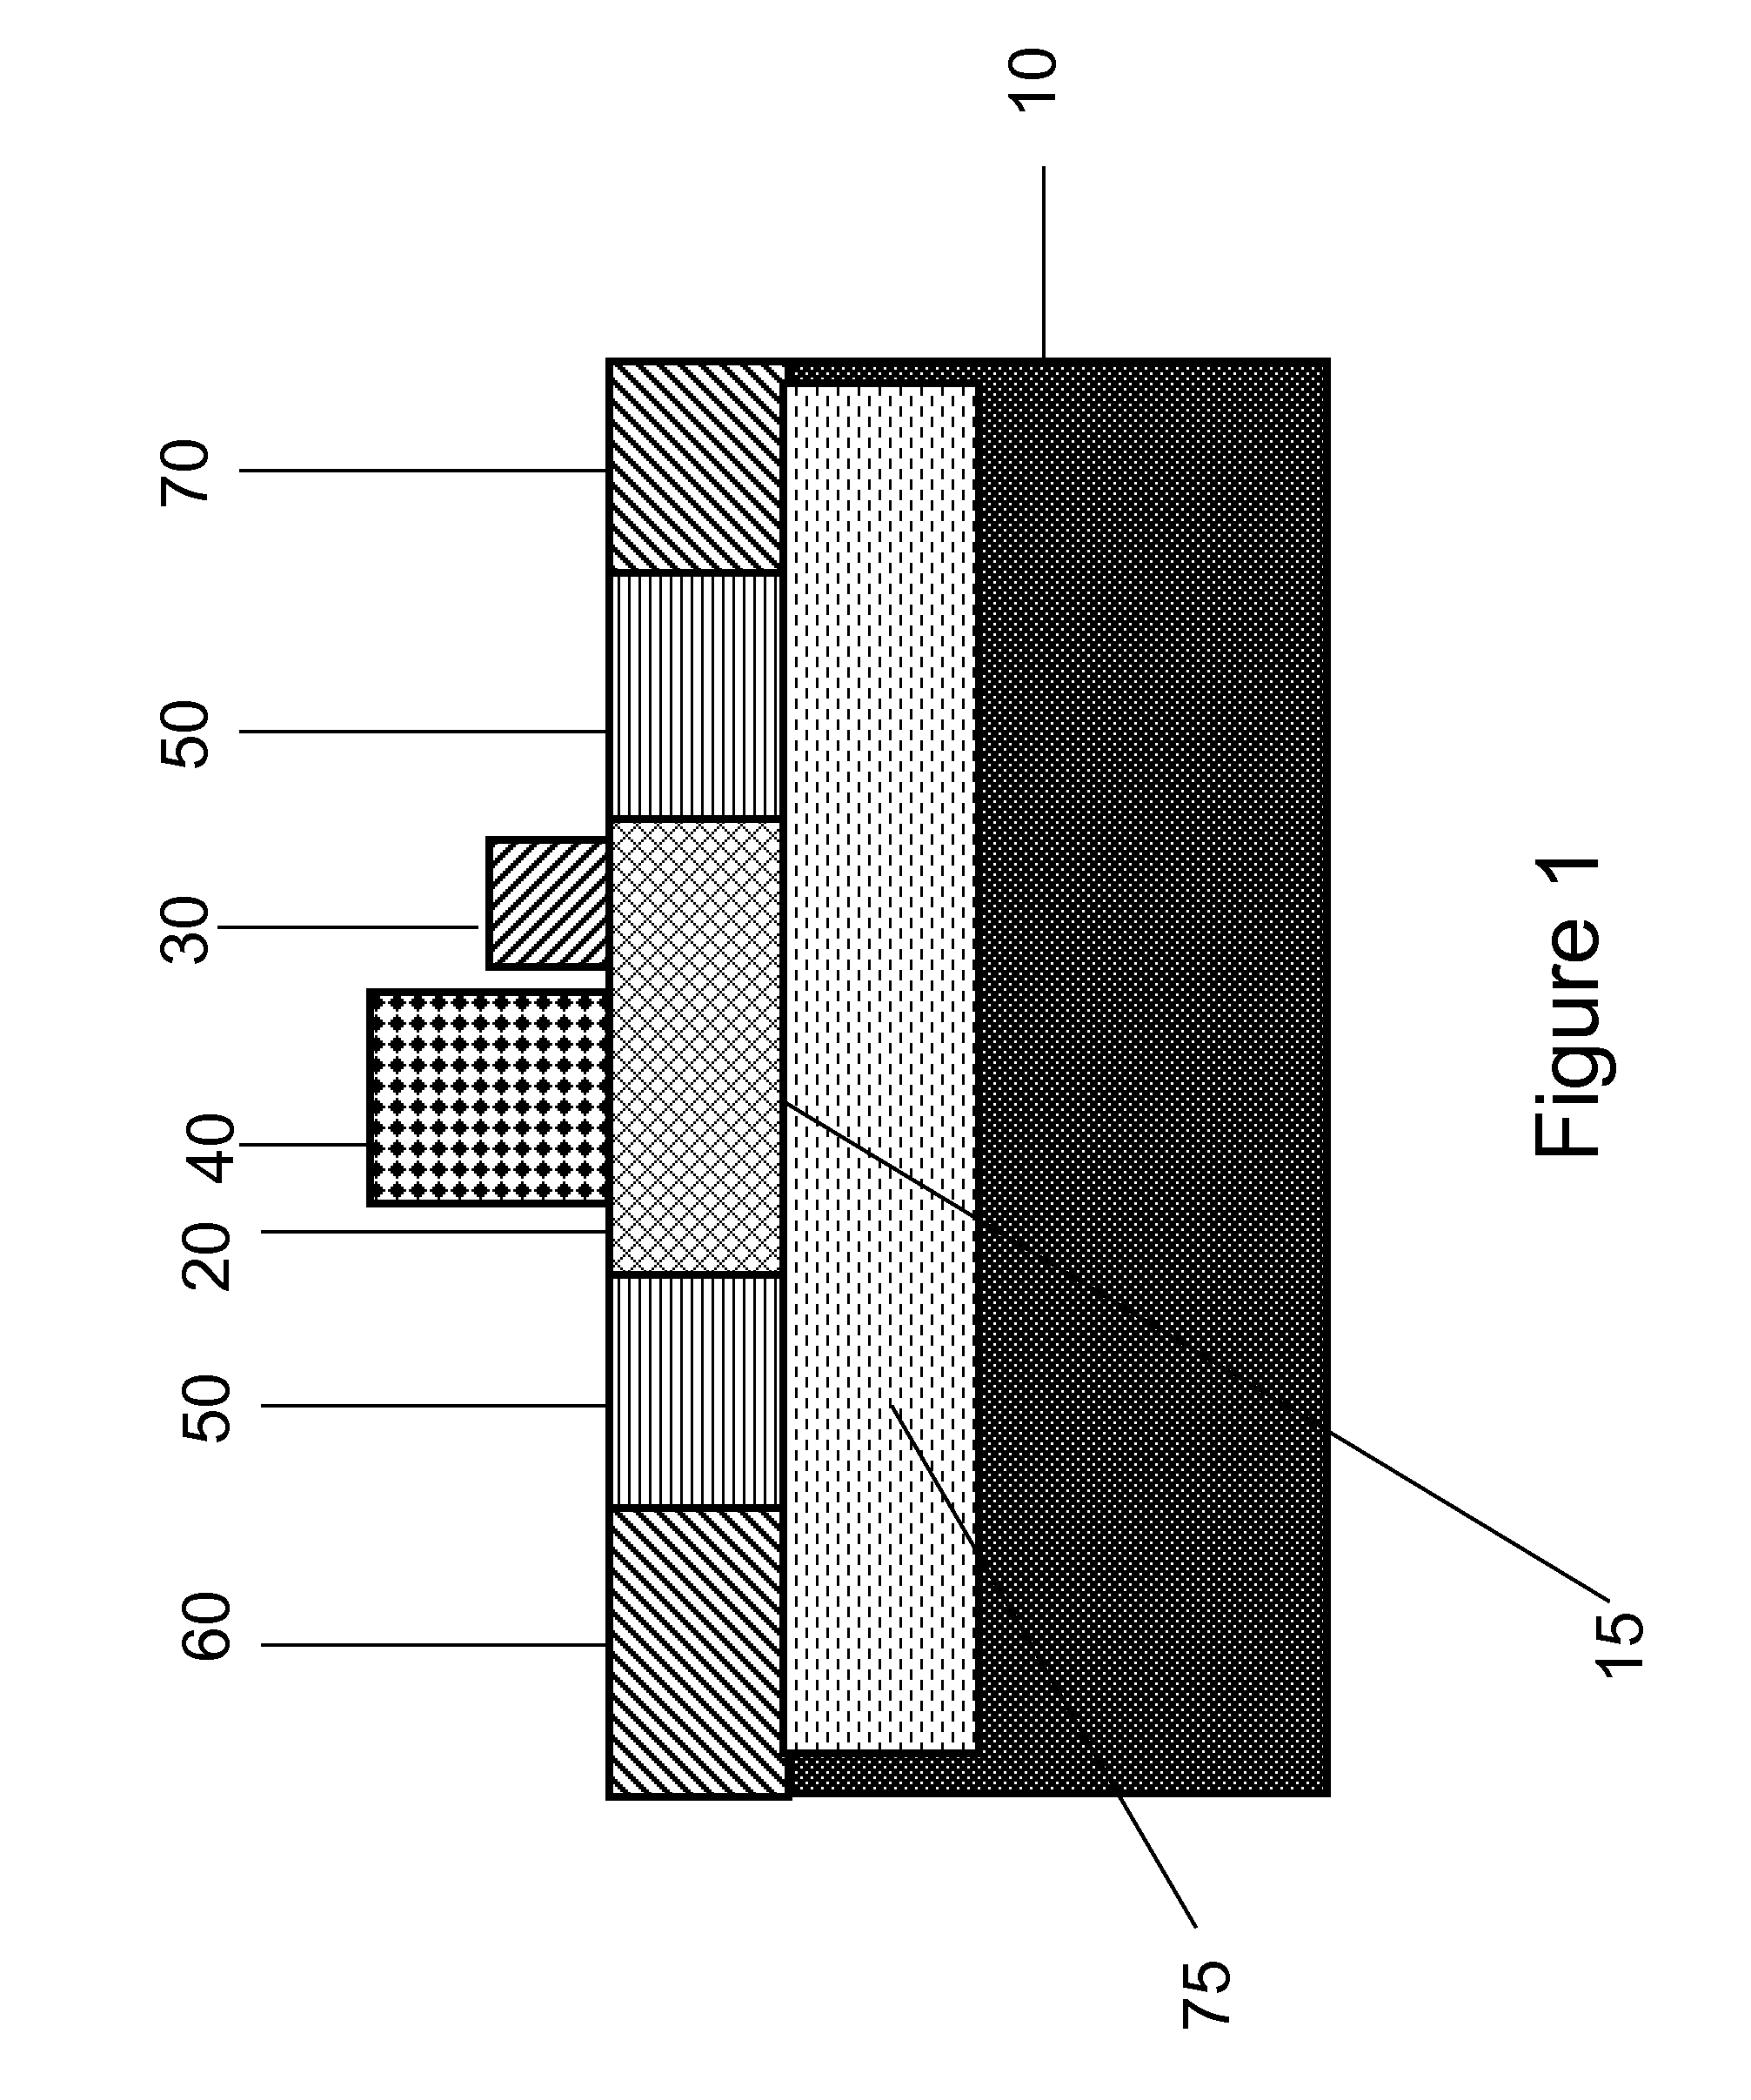 Apparatus for Increasing Blood Perfusion and Improving Heat Sinking to Skin